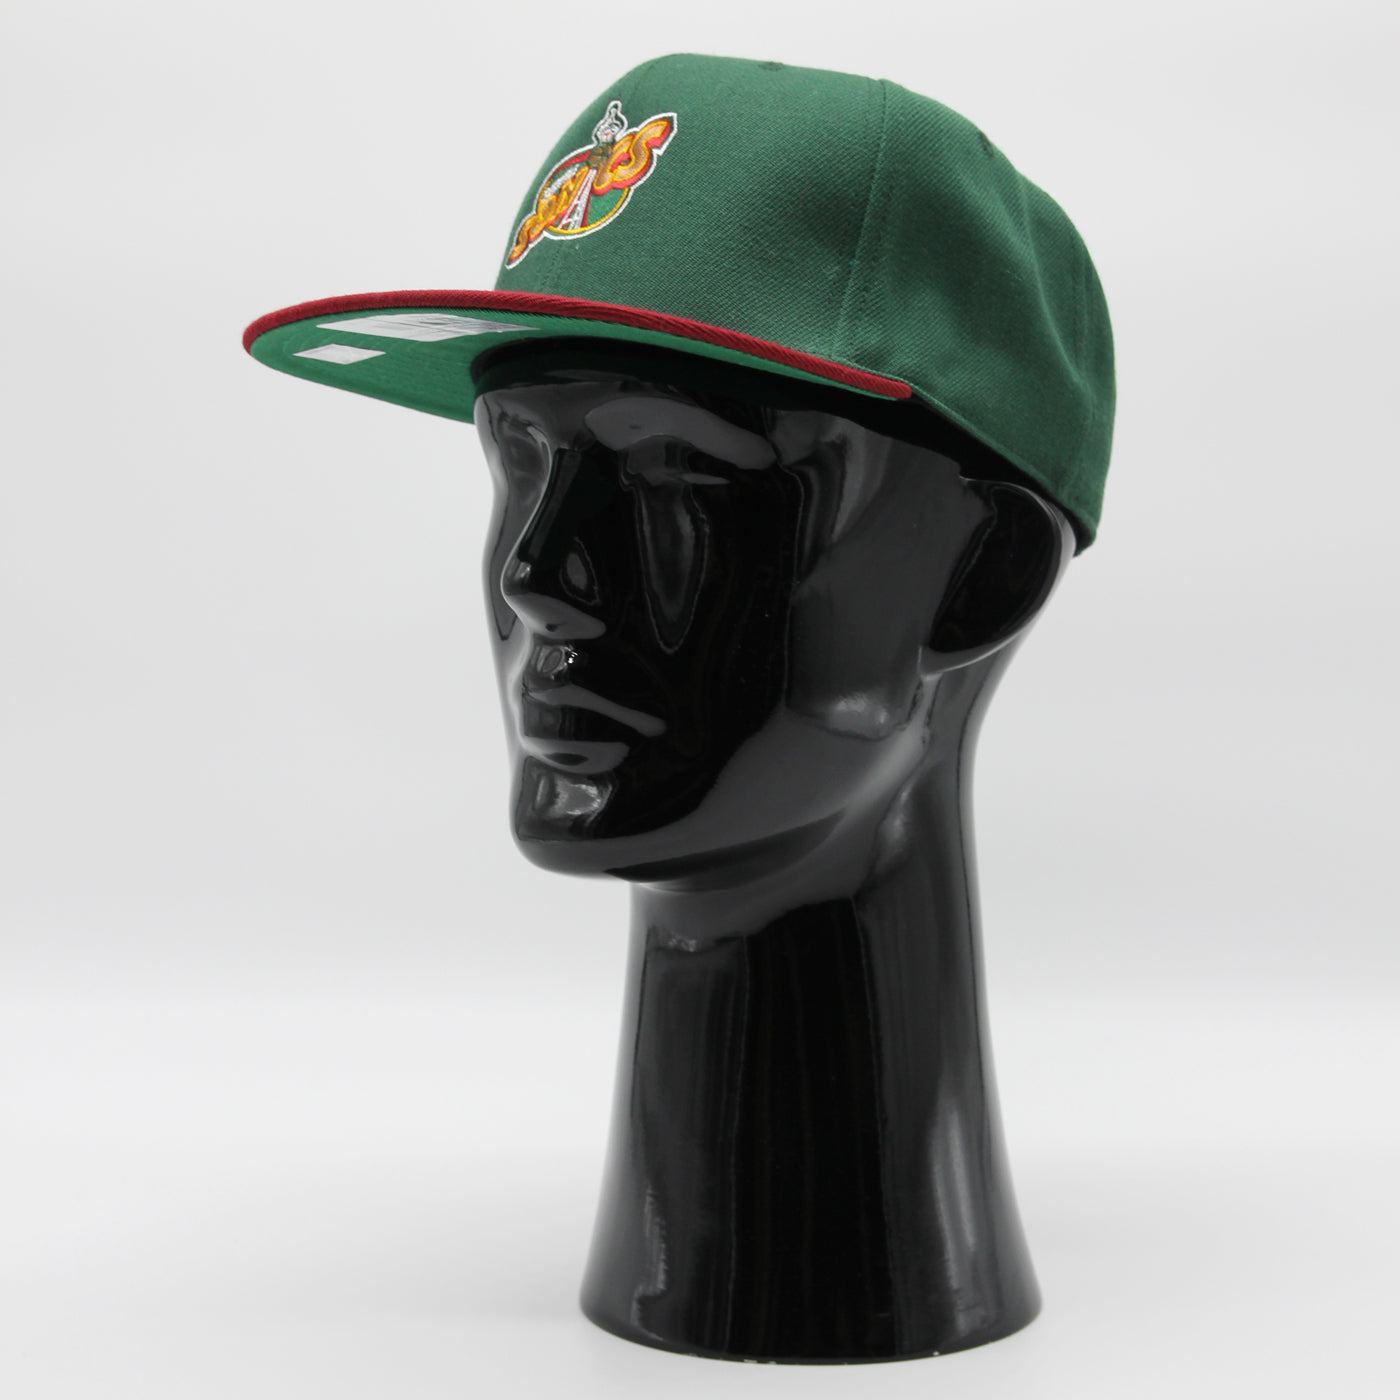 Mitchell & Ness NBA Team 2 Tone 2.0 fitted HWC S Supersonics